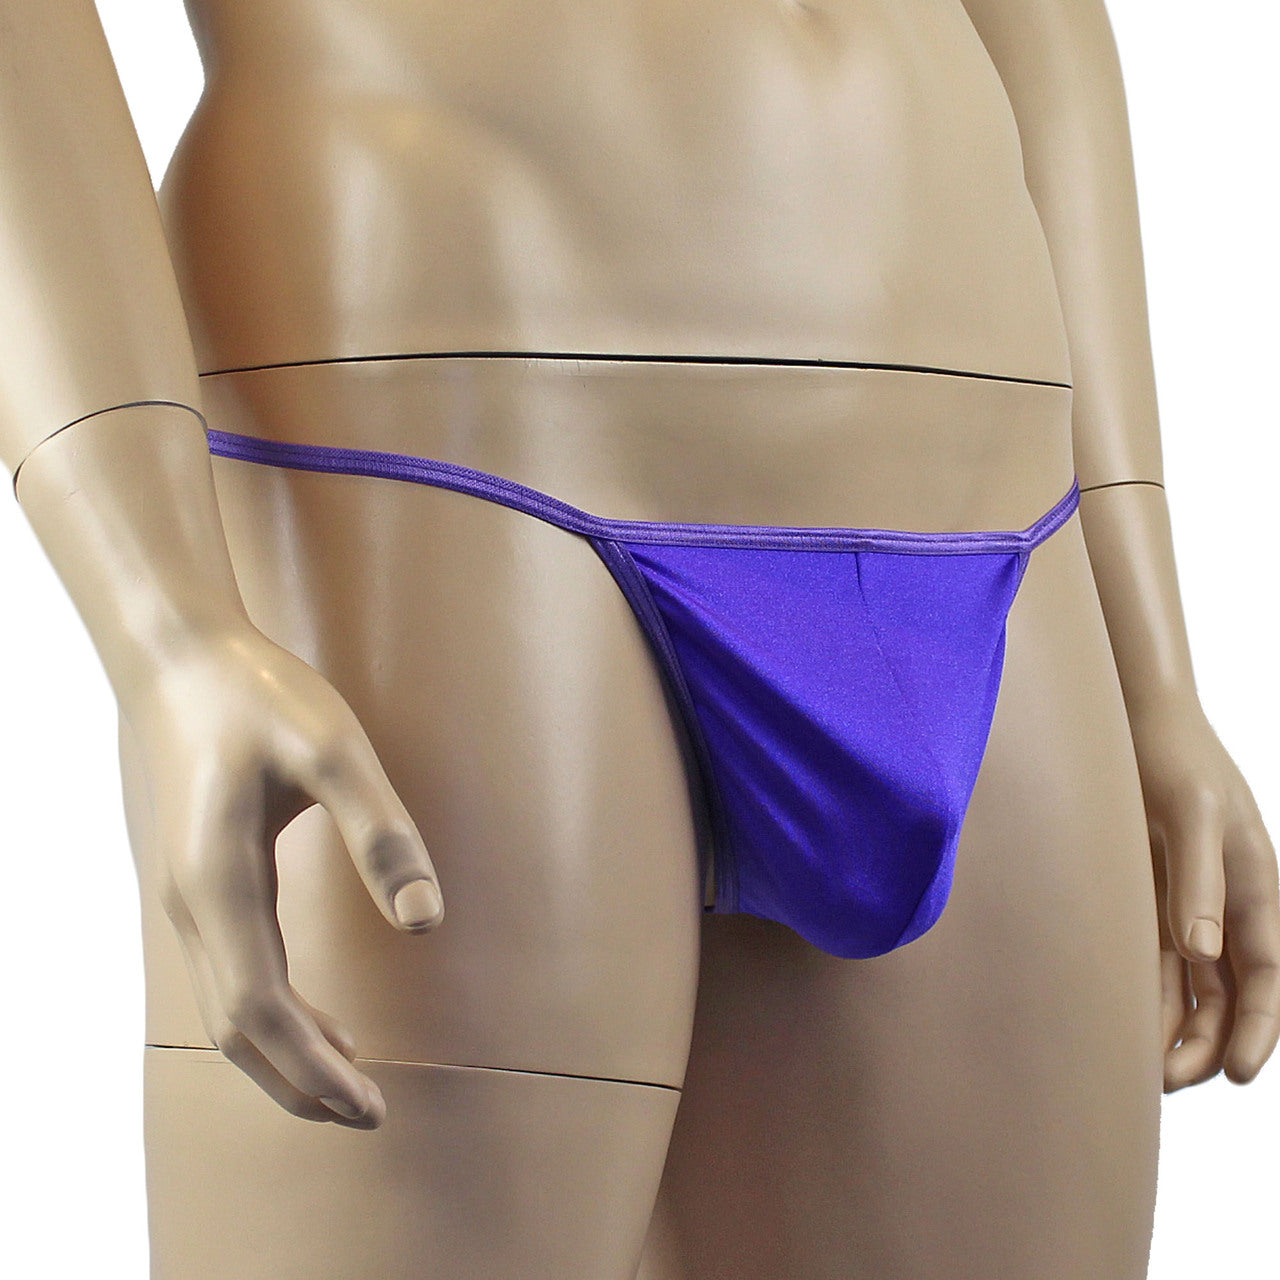 Mens Mick Keep It Simple Lycra Pouch G string Black with Thin Elastic Purple